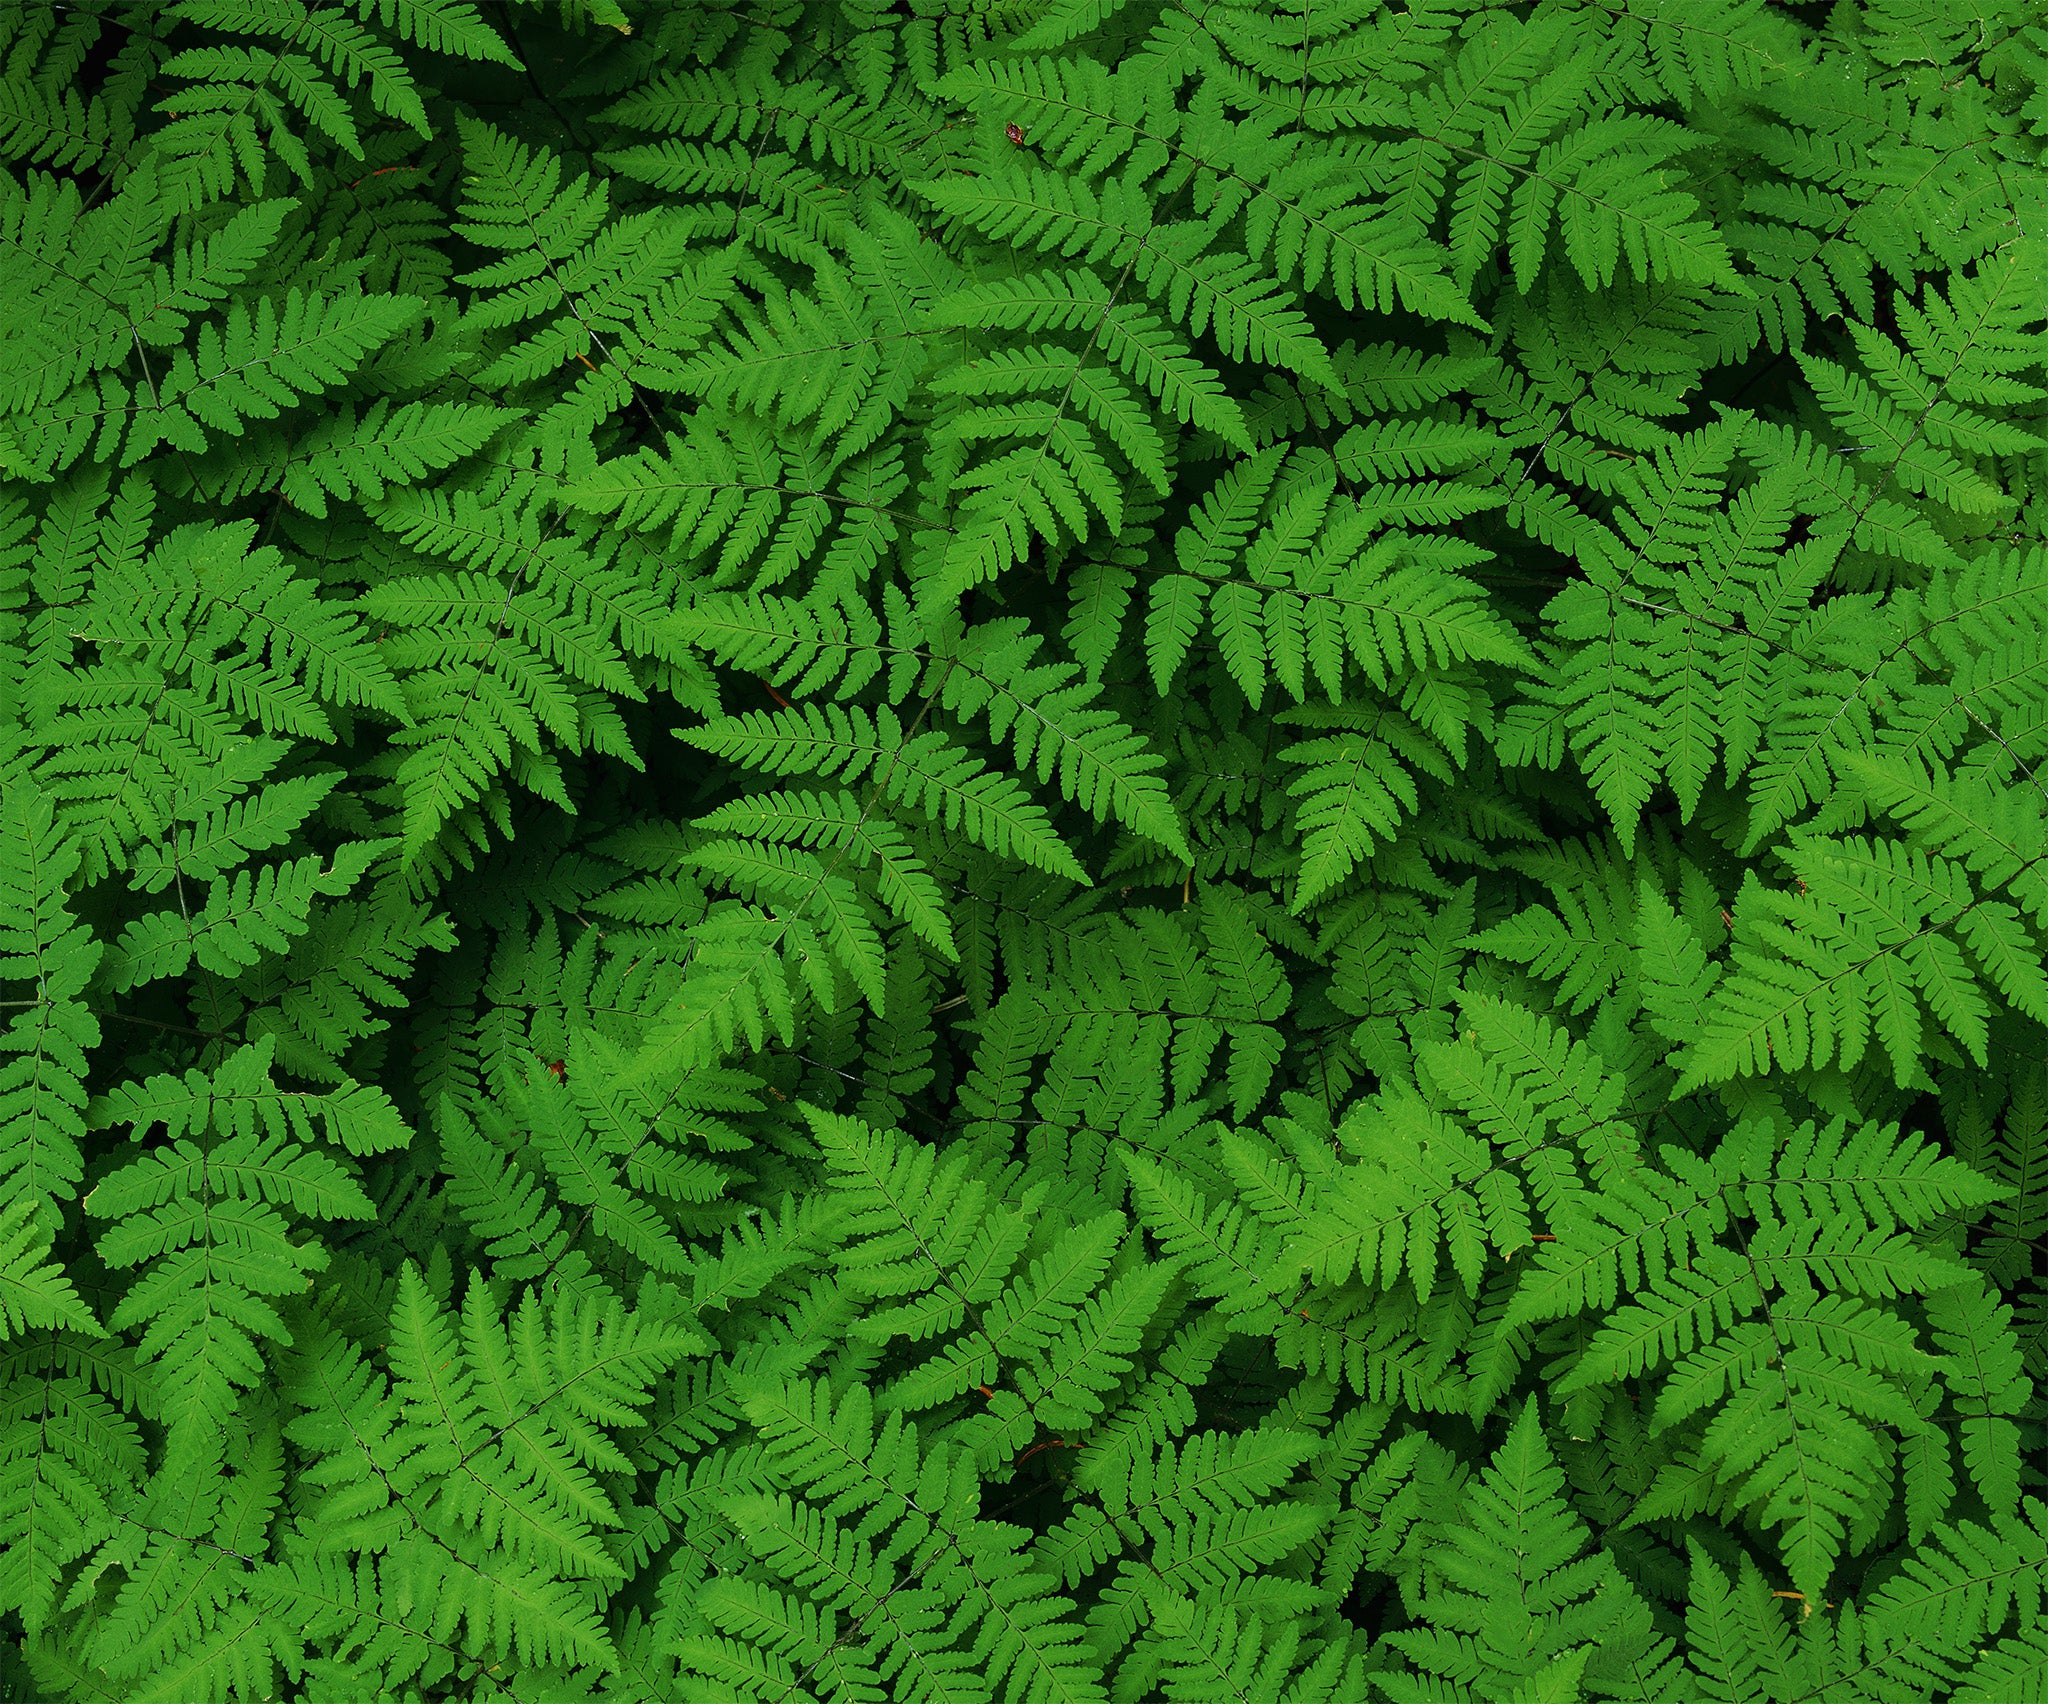 A vibrant green close up of multiple ferns covering the entire image.